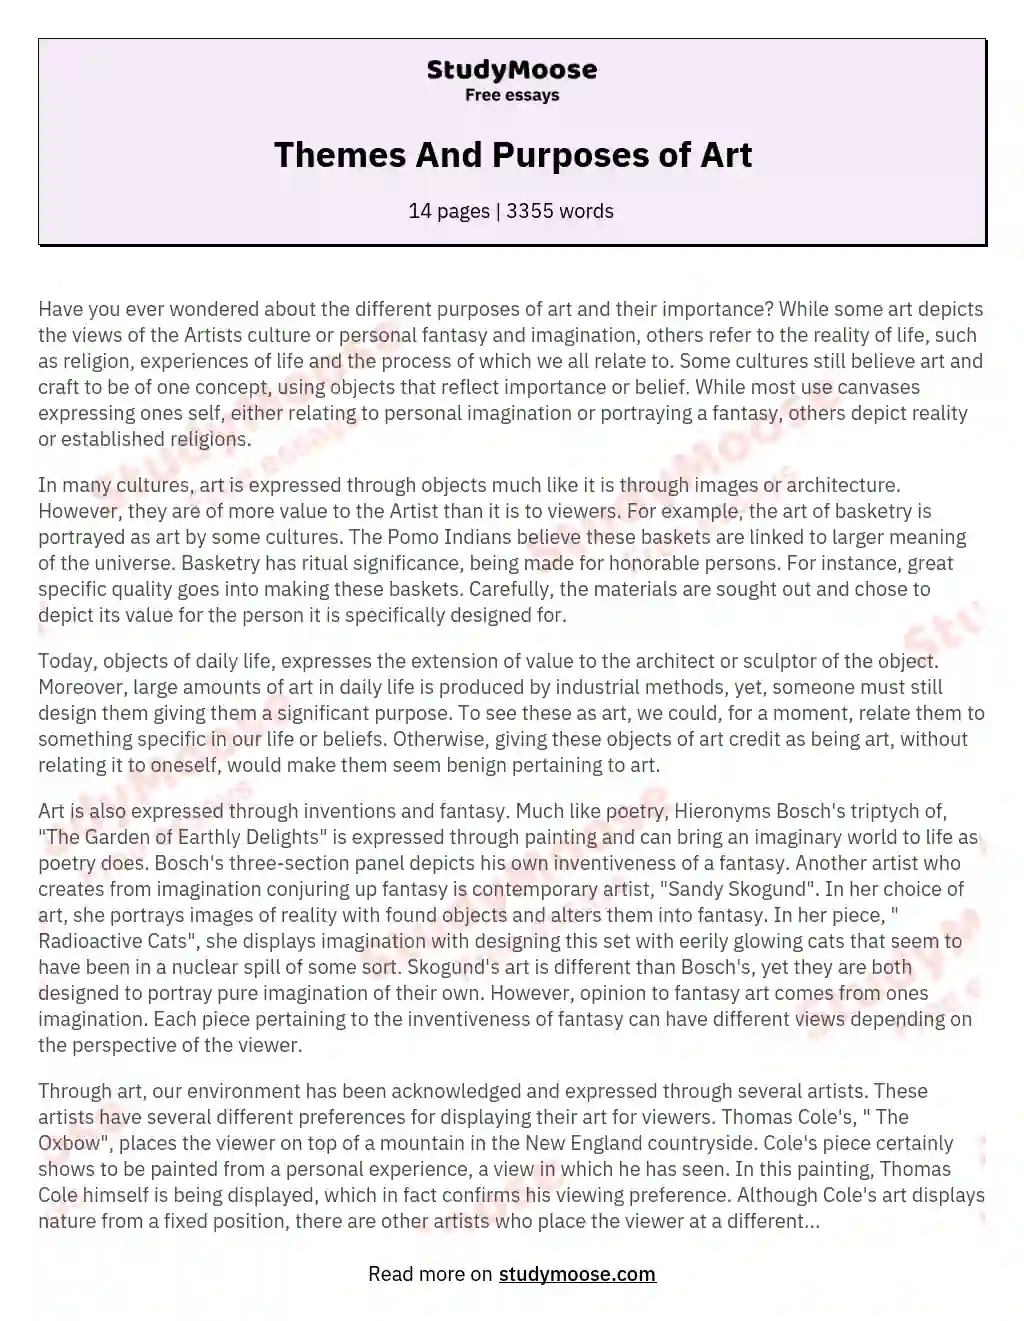 Themes And Purposes of Art